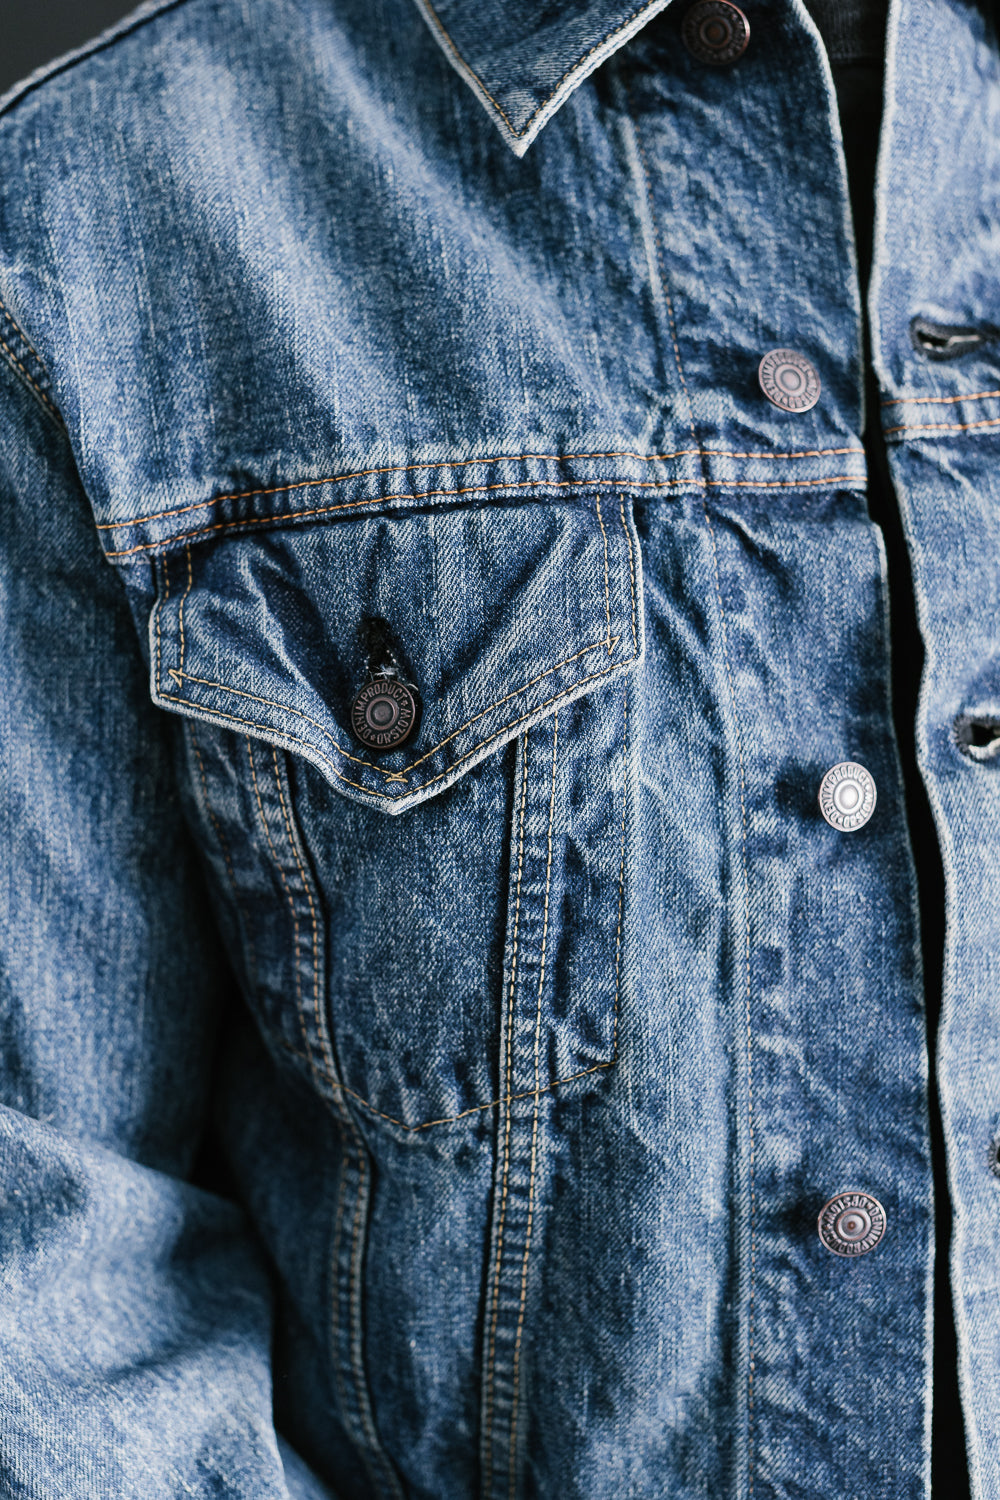 The Best Types of Denim Fabric and Denim Washes